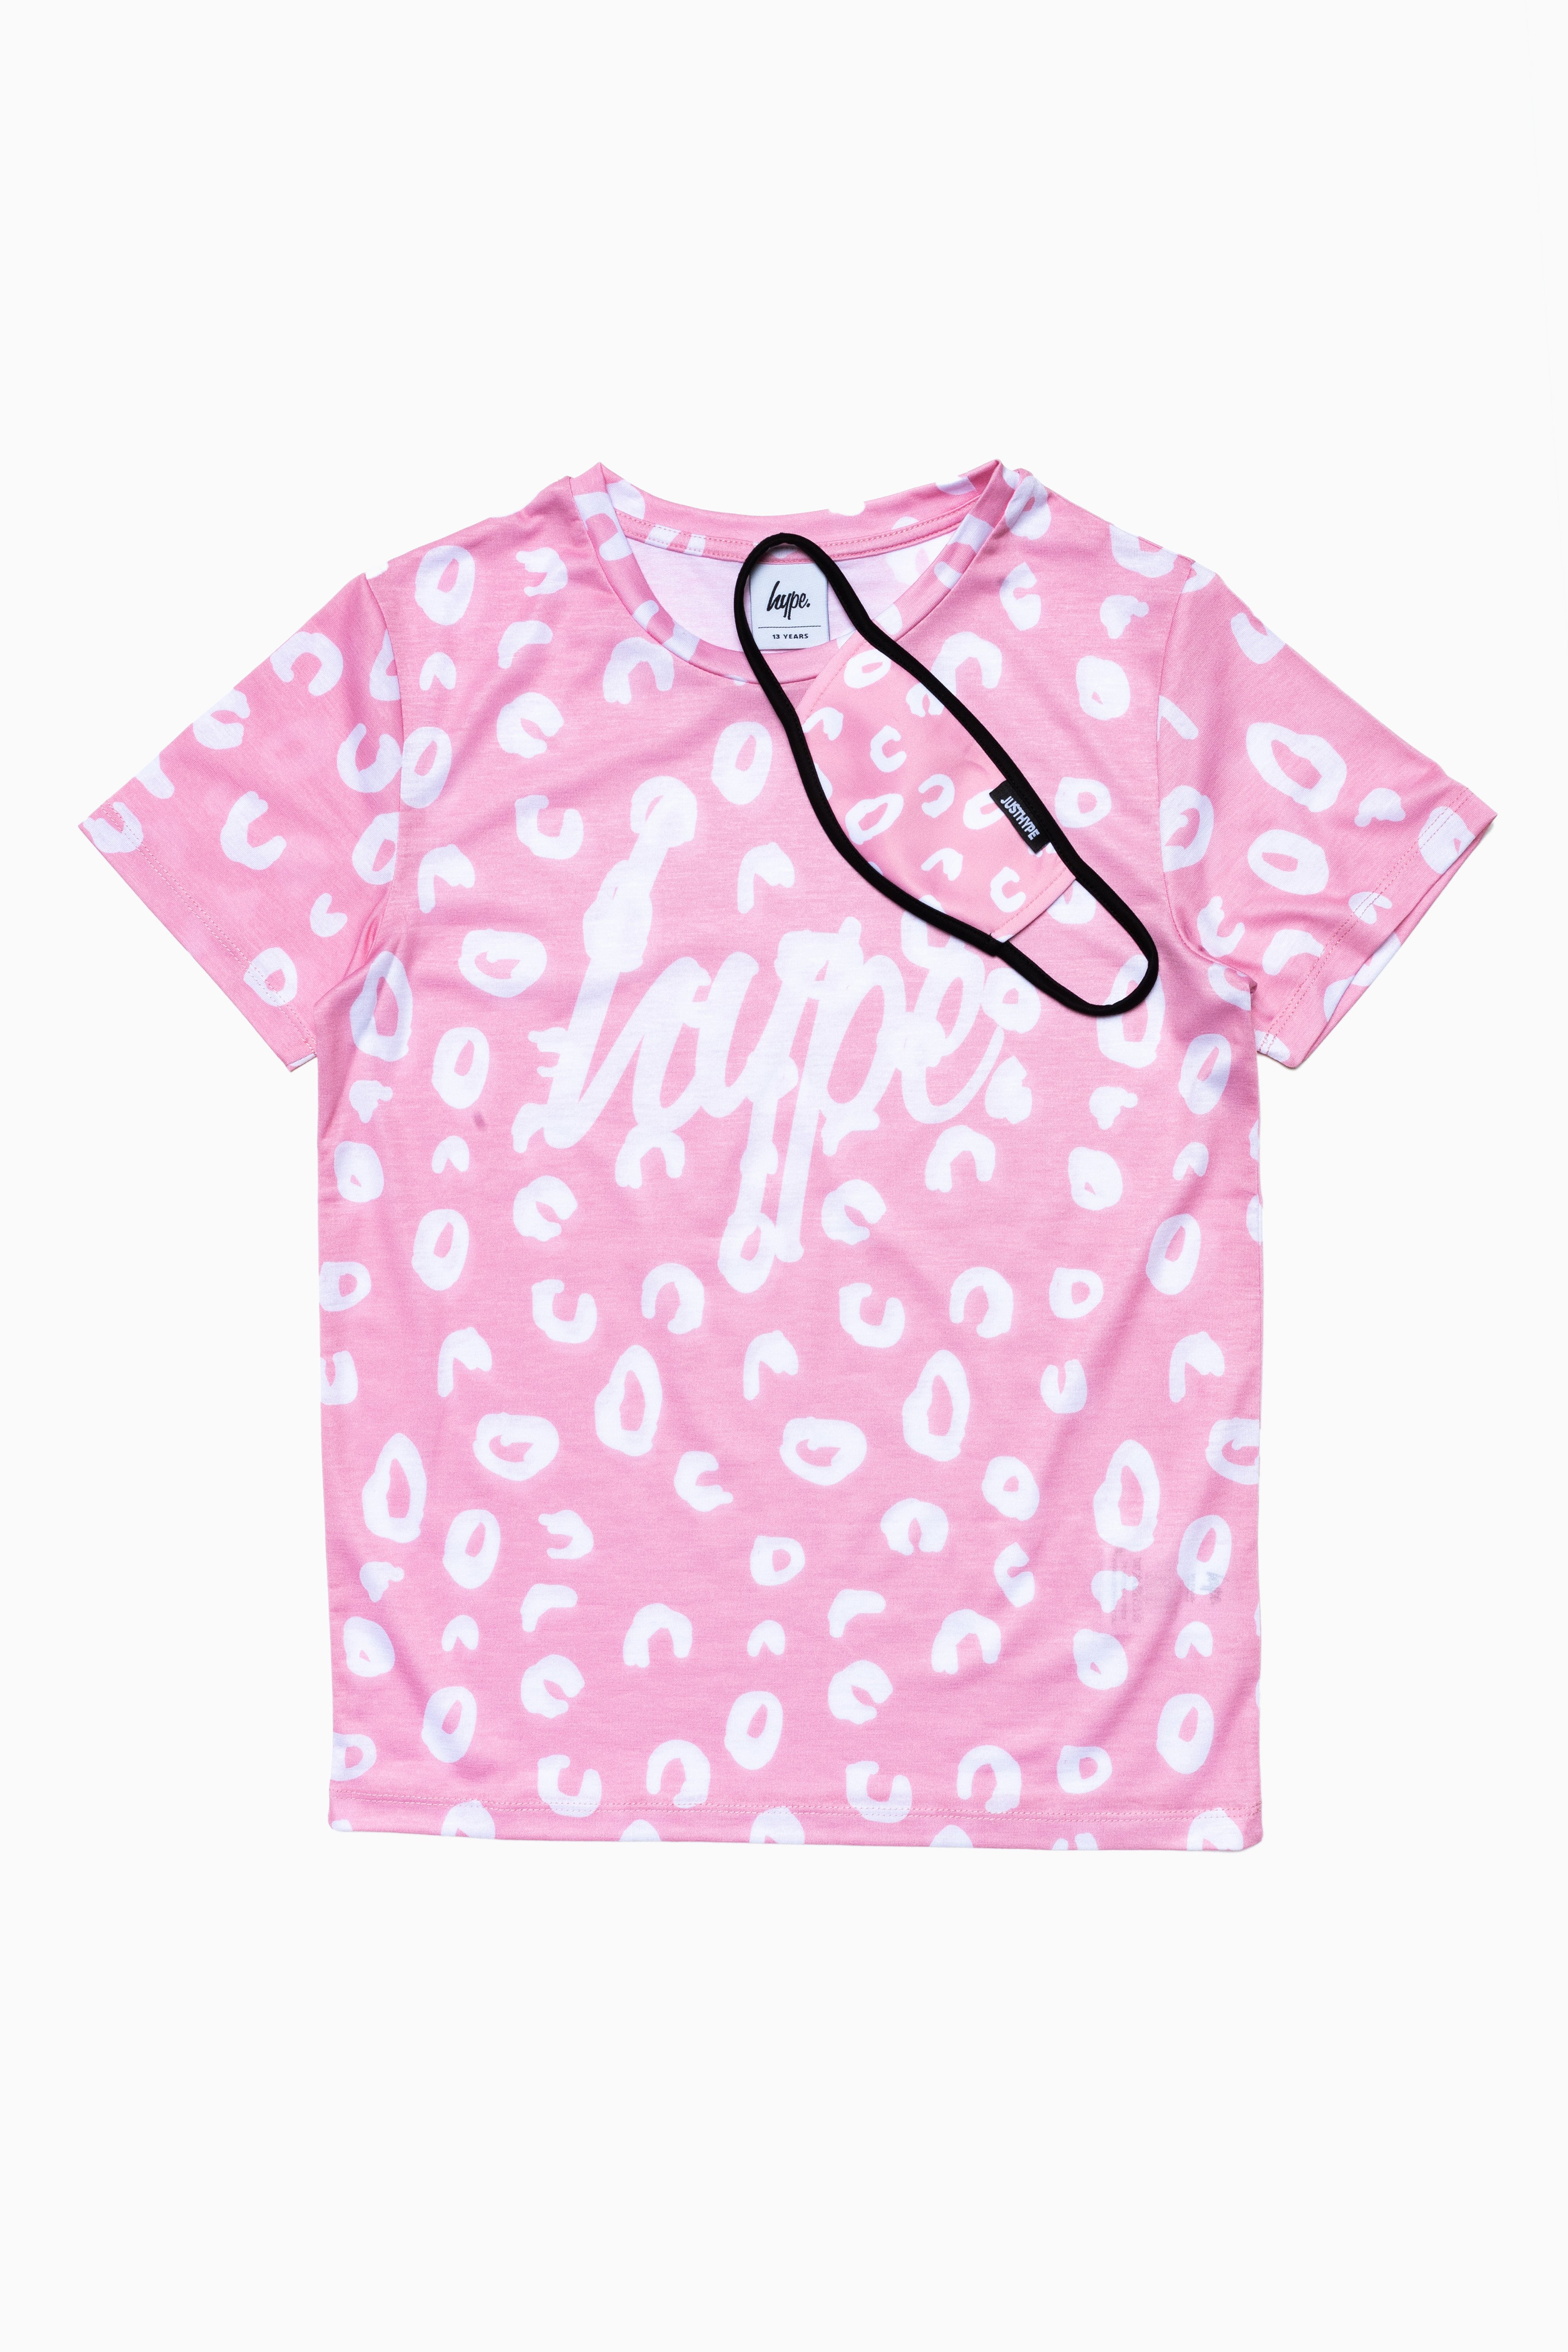 Hype Pink Leopard Kids Pink/white T-Shirt & Face Mask Set | Size 14Y